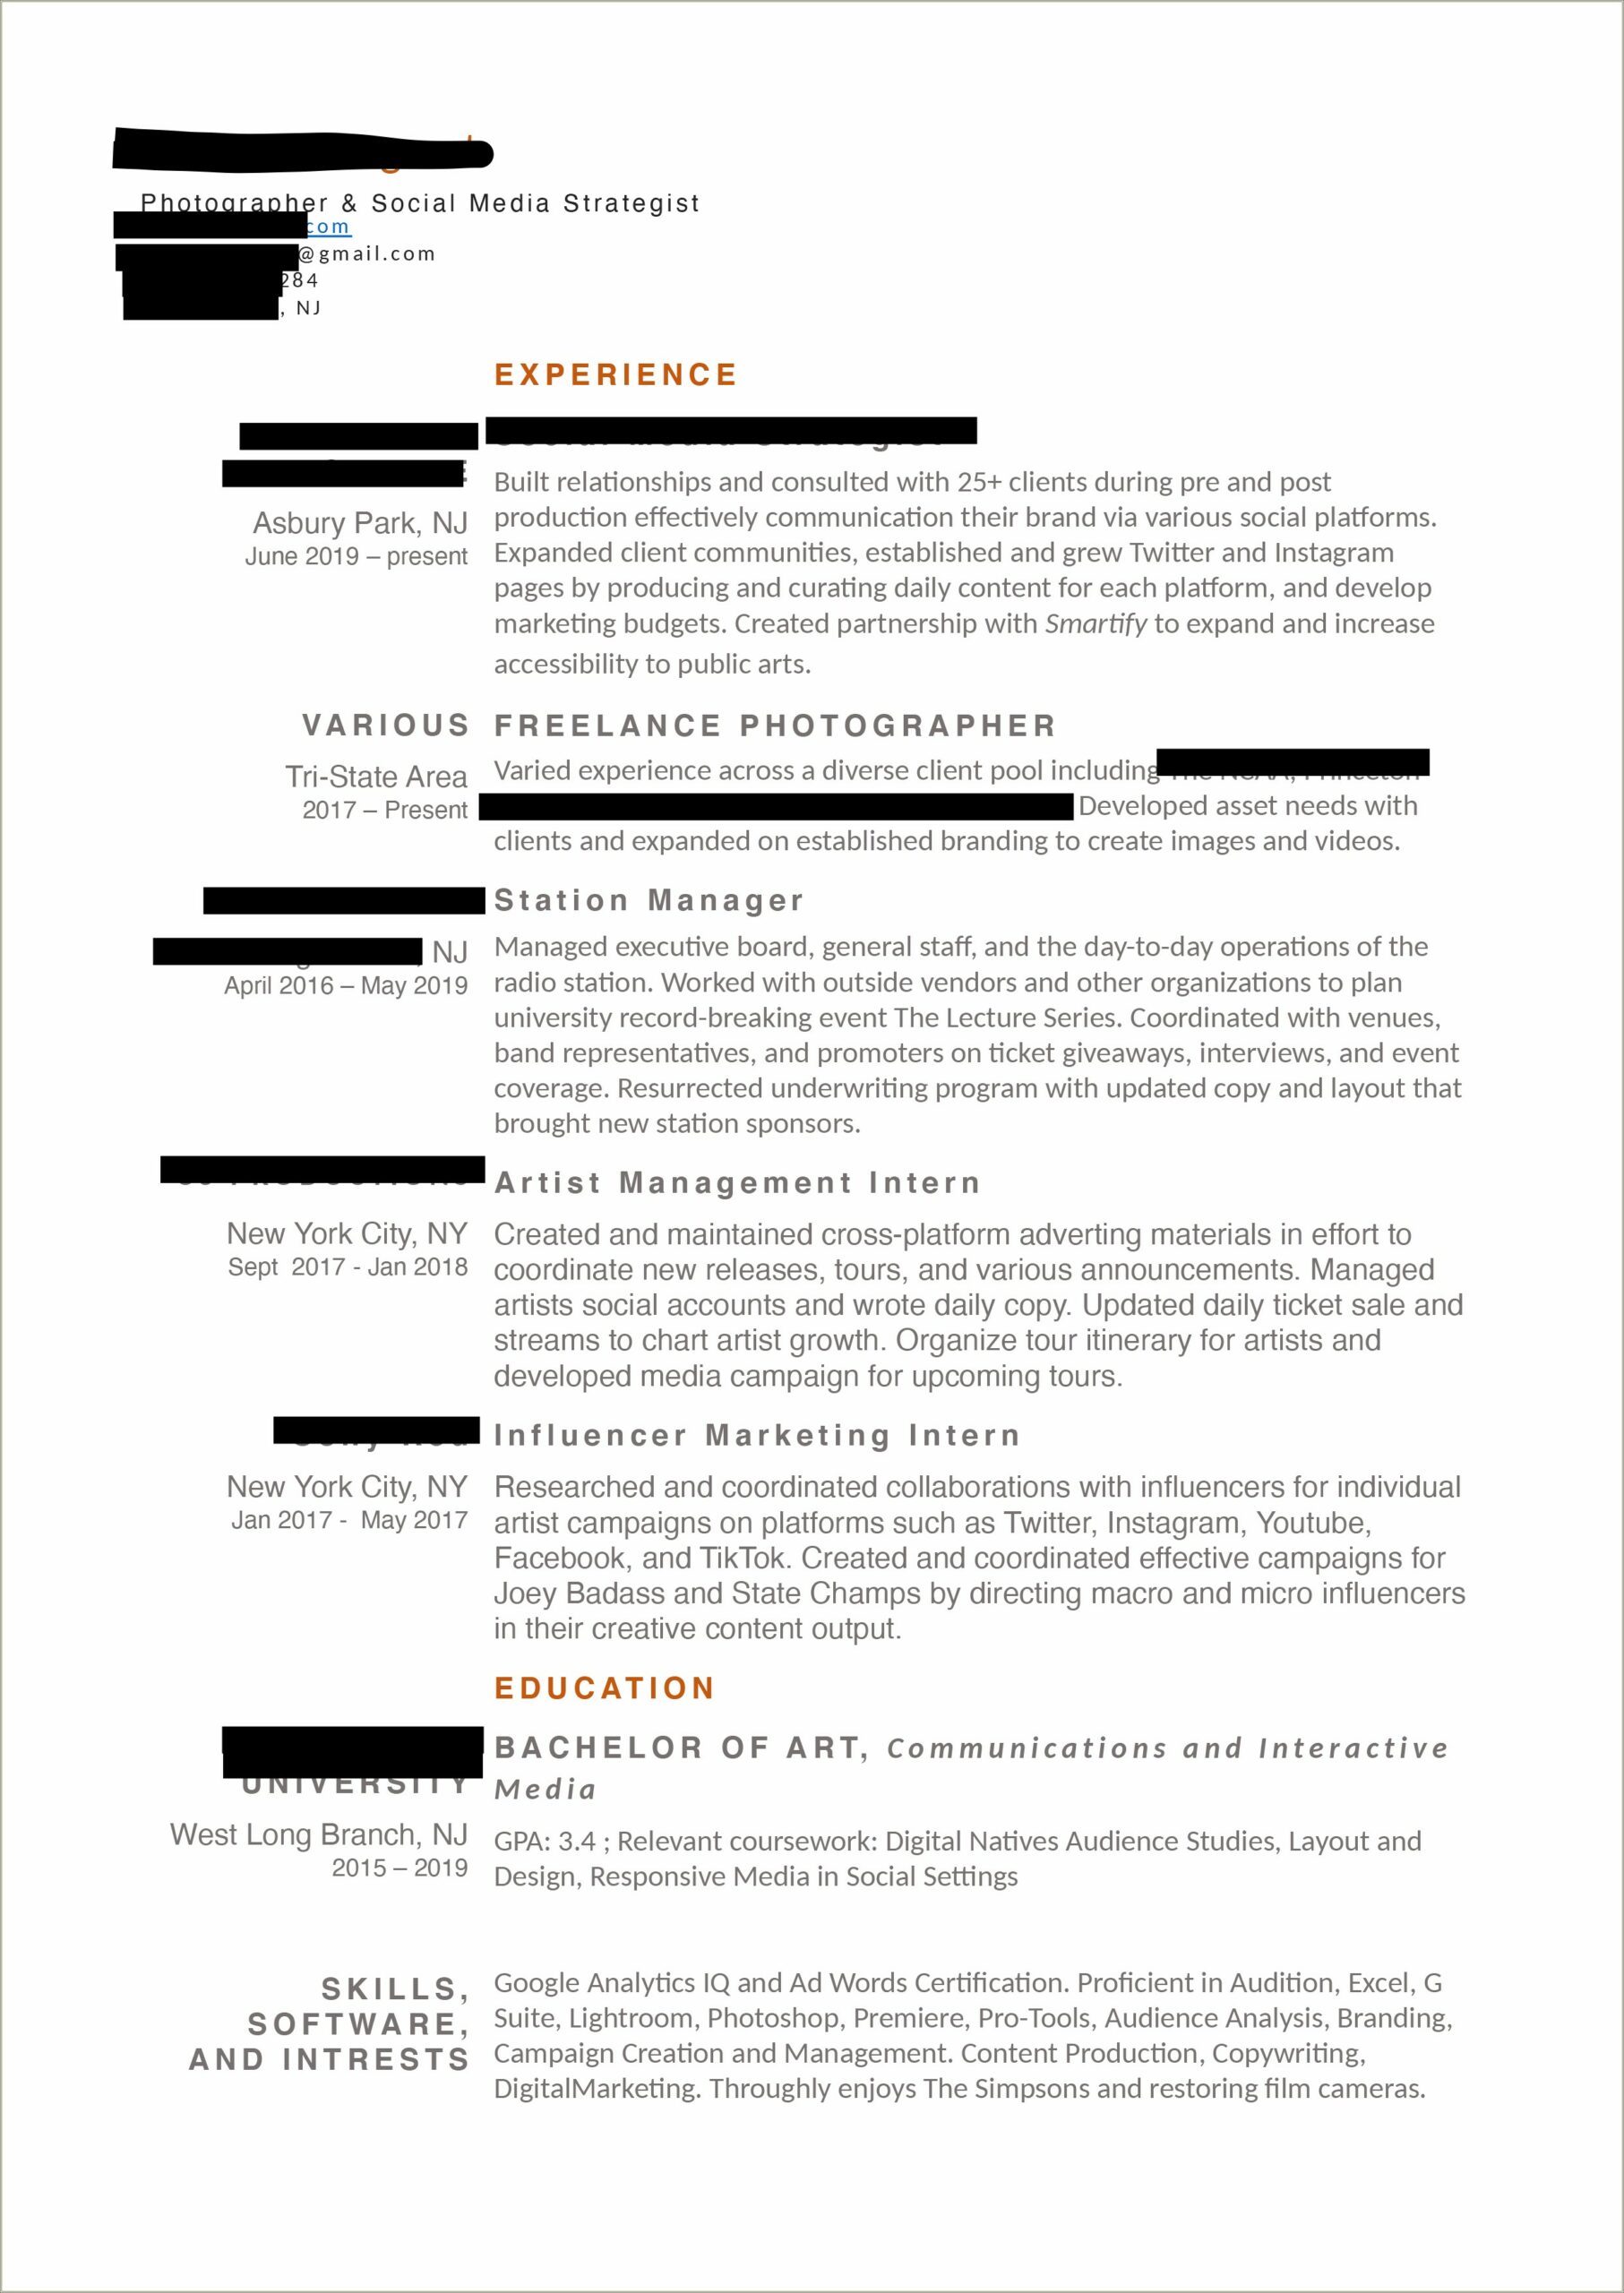 Other Words For Coordinated In Resume